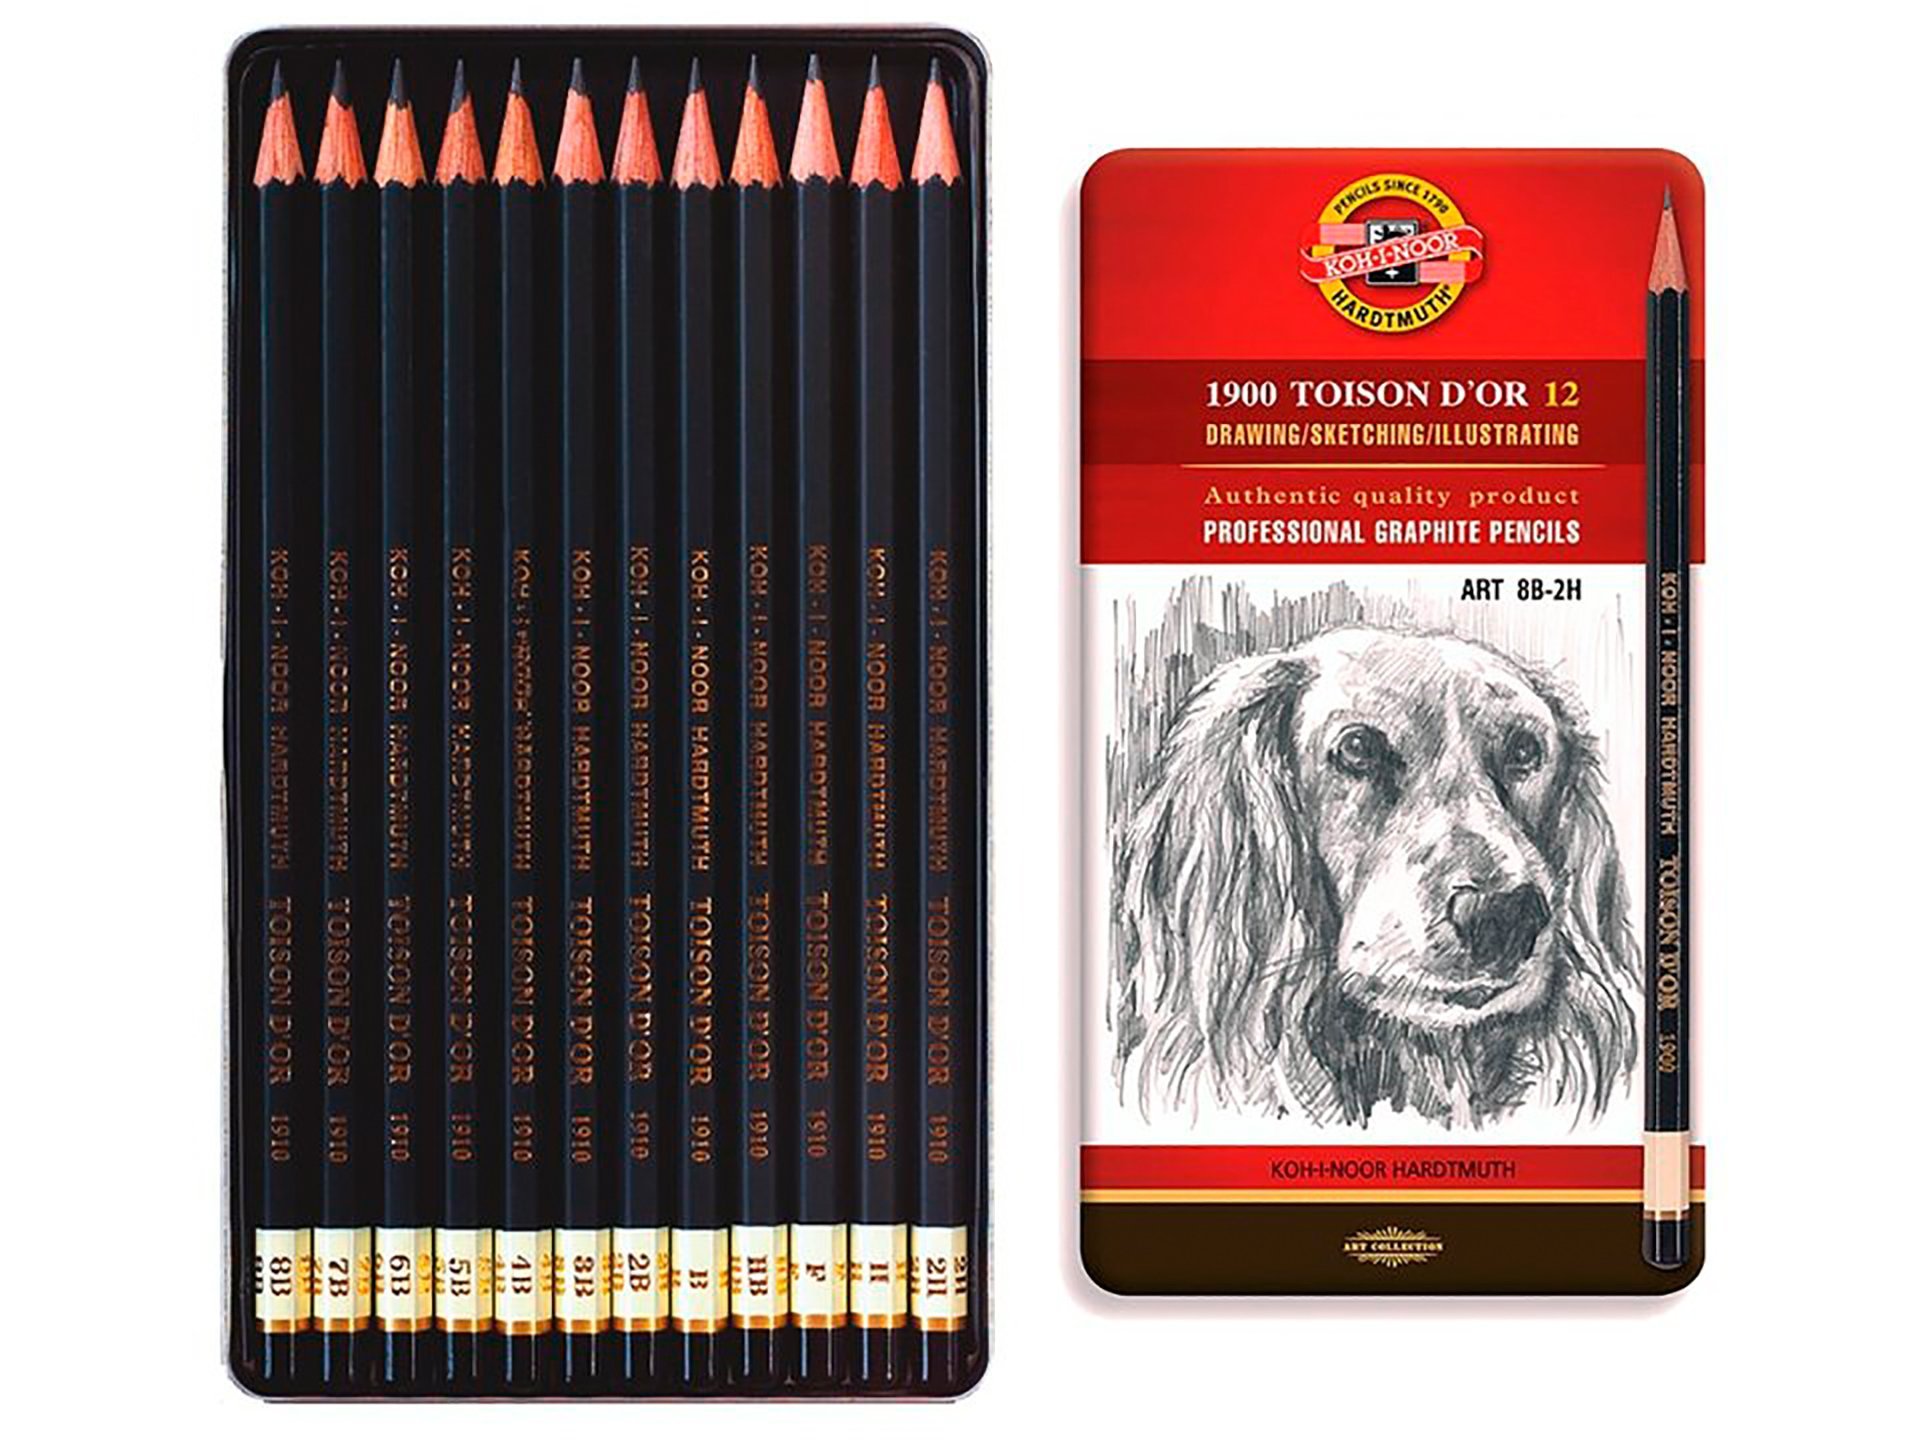 KOH-I-NOOR TOISON D'OR 12 PROFESSIONAL GRAPHITE PENCILS NEW MANY VARIATIONS 